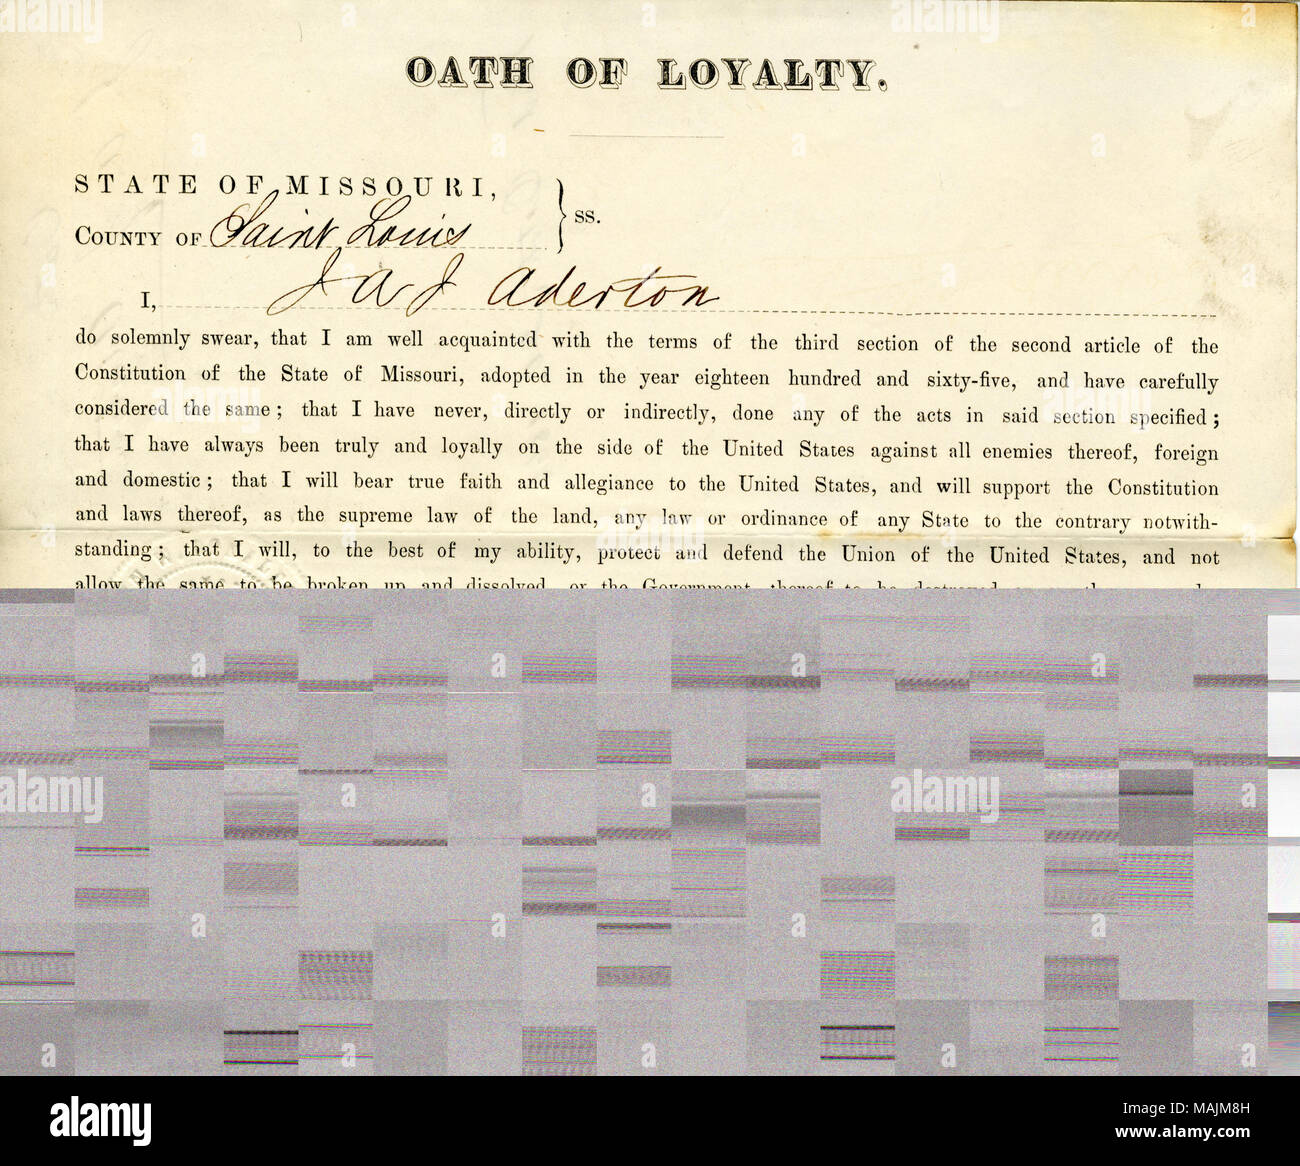 Loyalty oath of J. Aderton, State of Missouri, County of St. Louis, page one, October 20, 1866. Dexter P. Tiffany Collection, Missouri History Museum, St. Louis, Missouri. B69/F4 Stock Photo